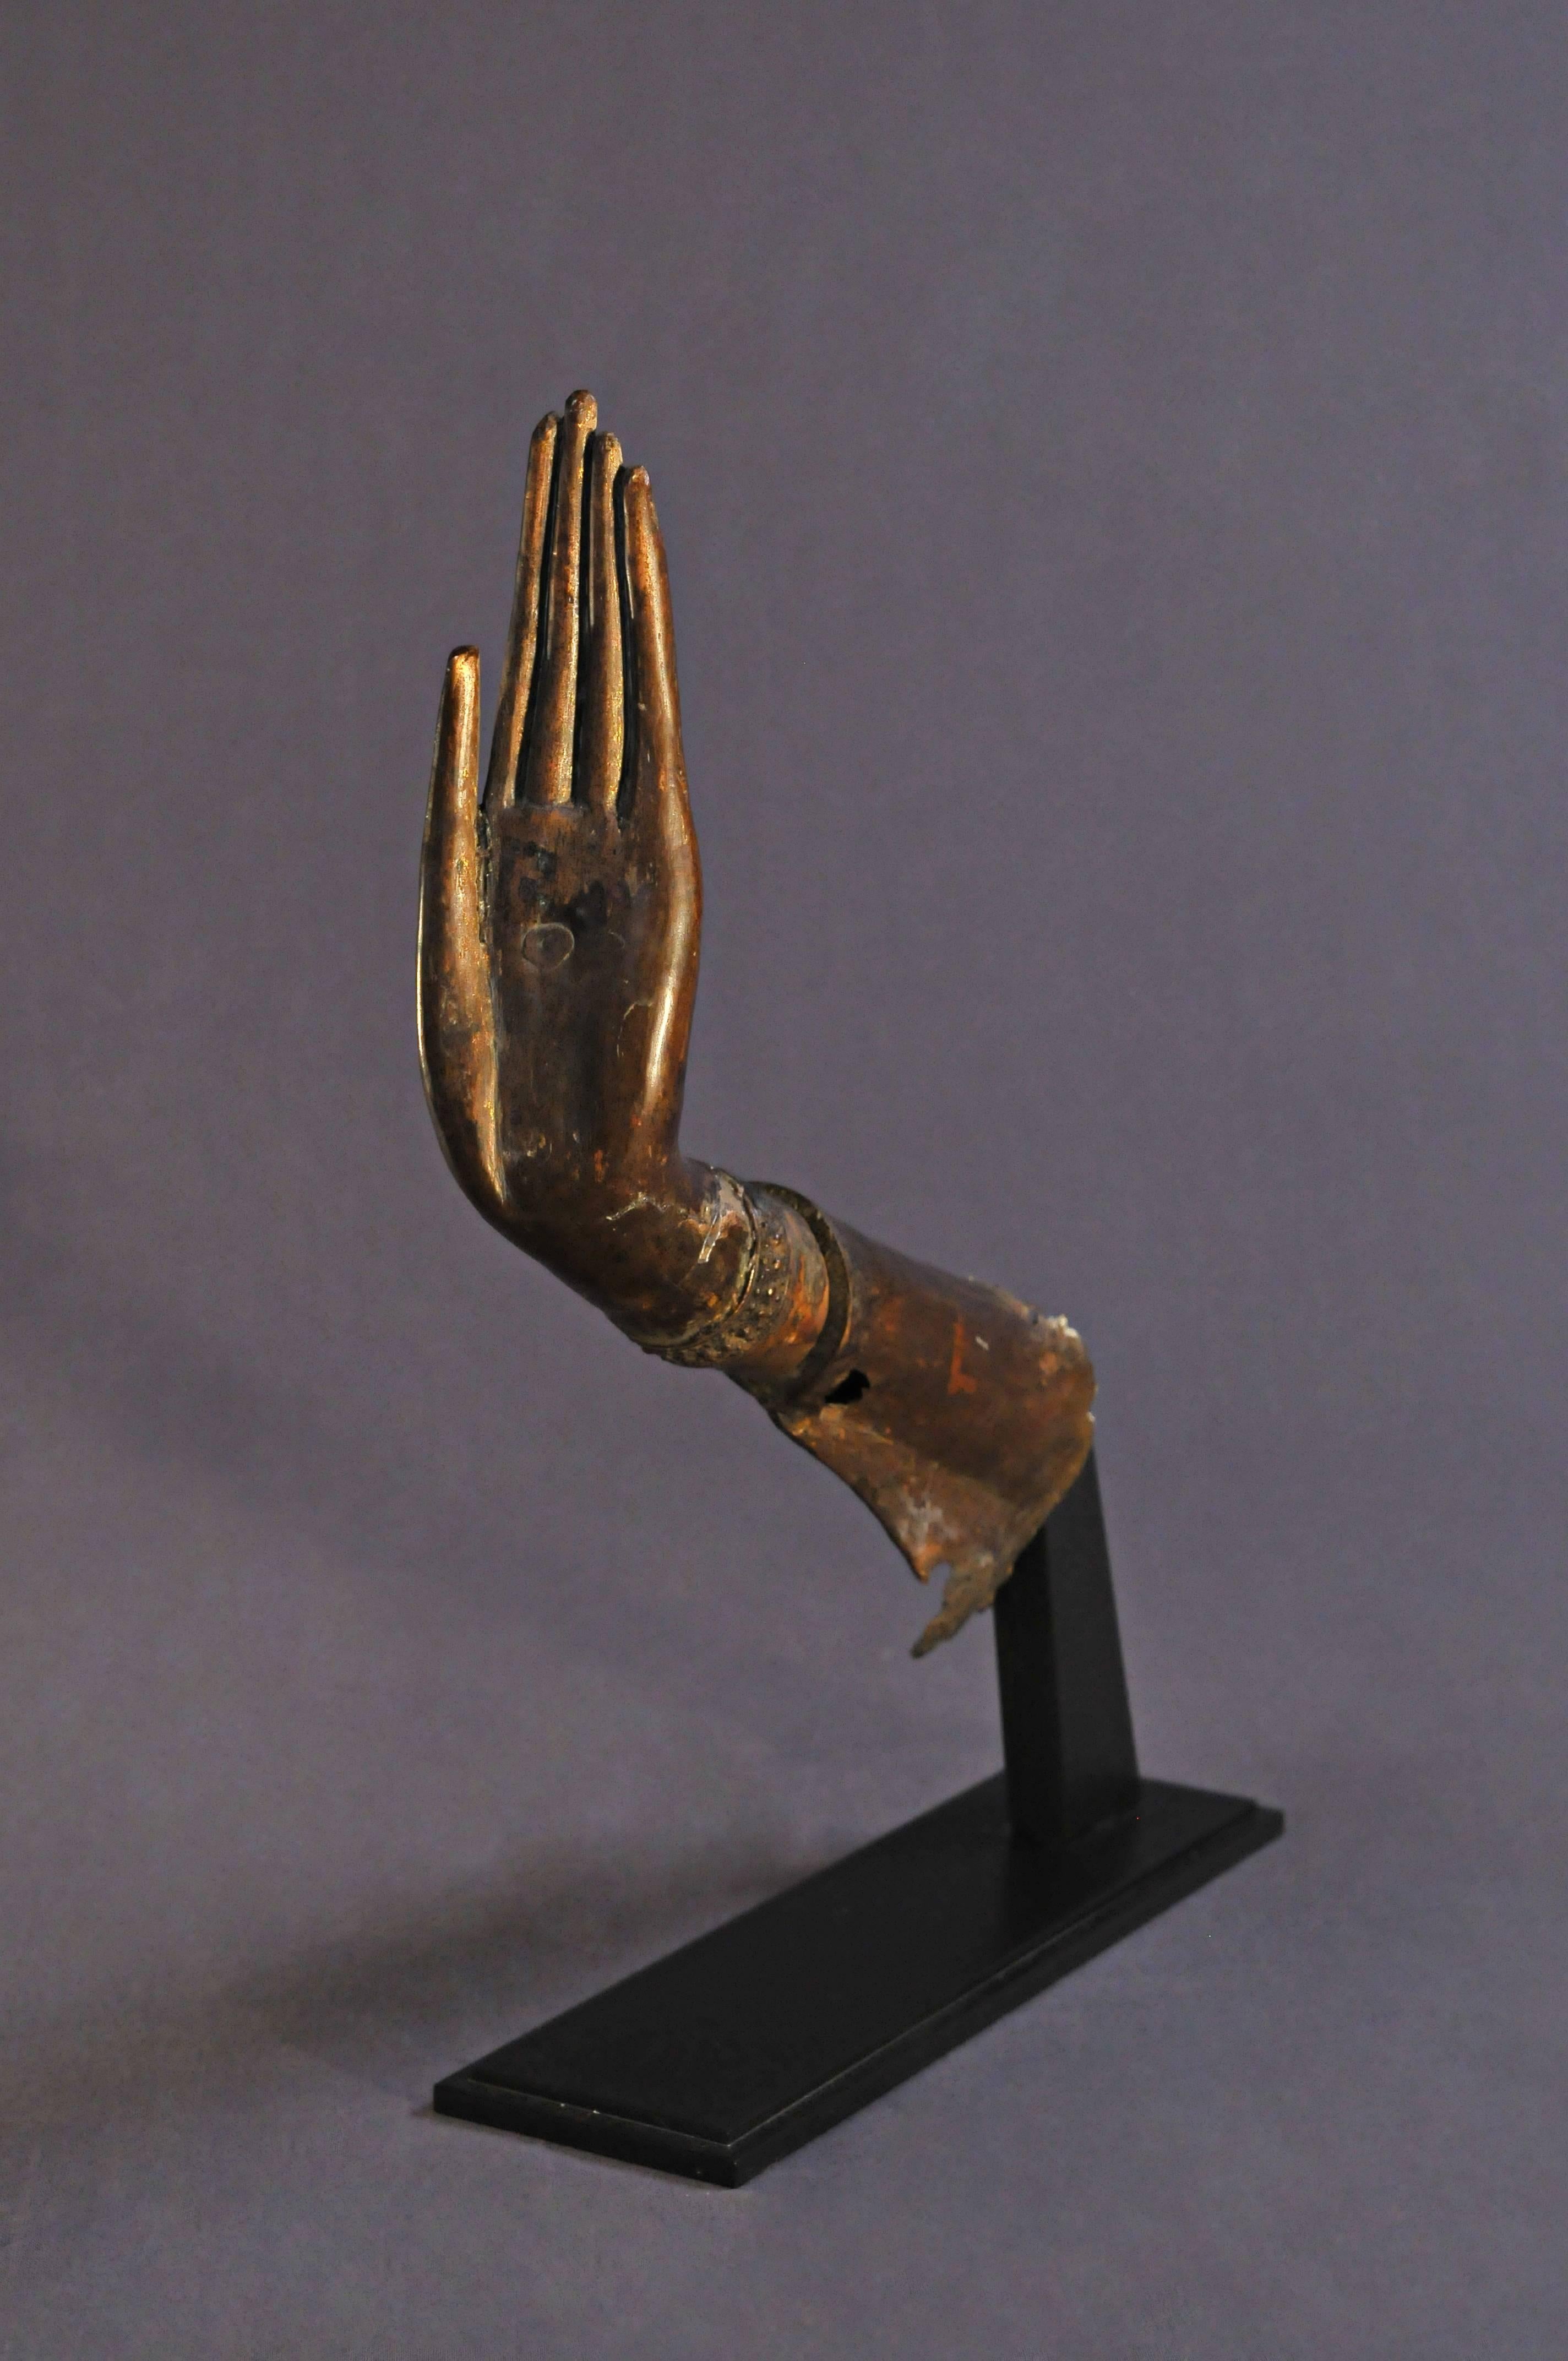 Buddhist iconography gives each gesture a symbolic value that recalls an important episode in the life of the Master. This hand evokes one of the ritual gestures most frequently represented, that of 